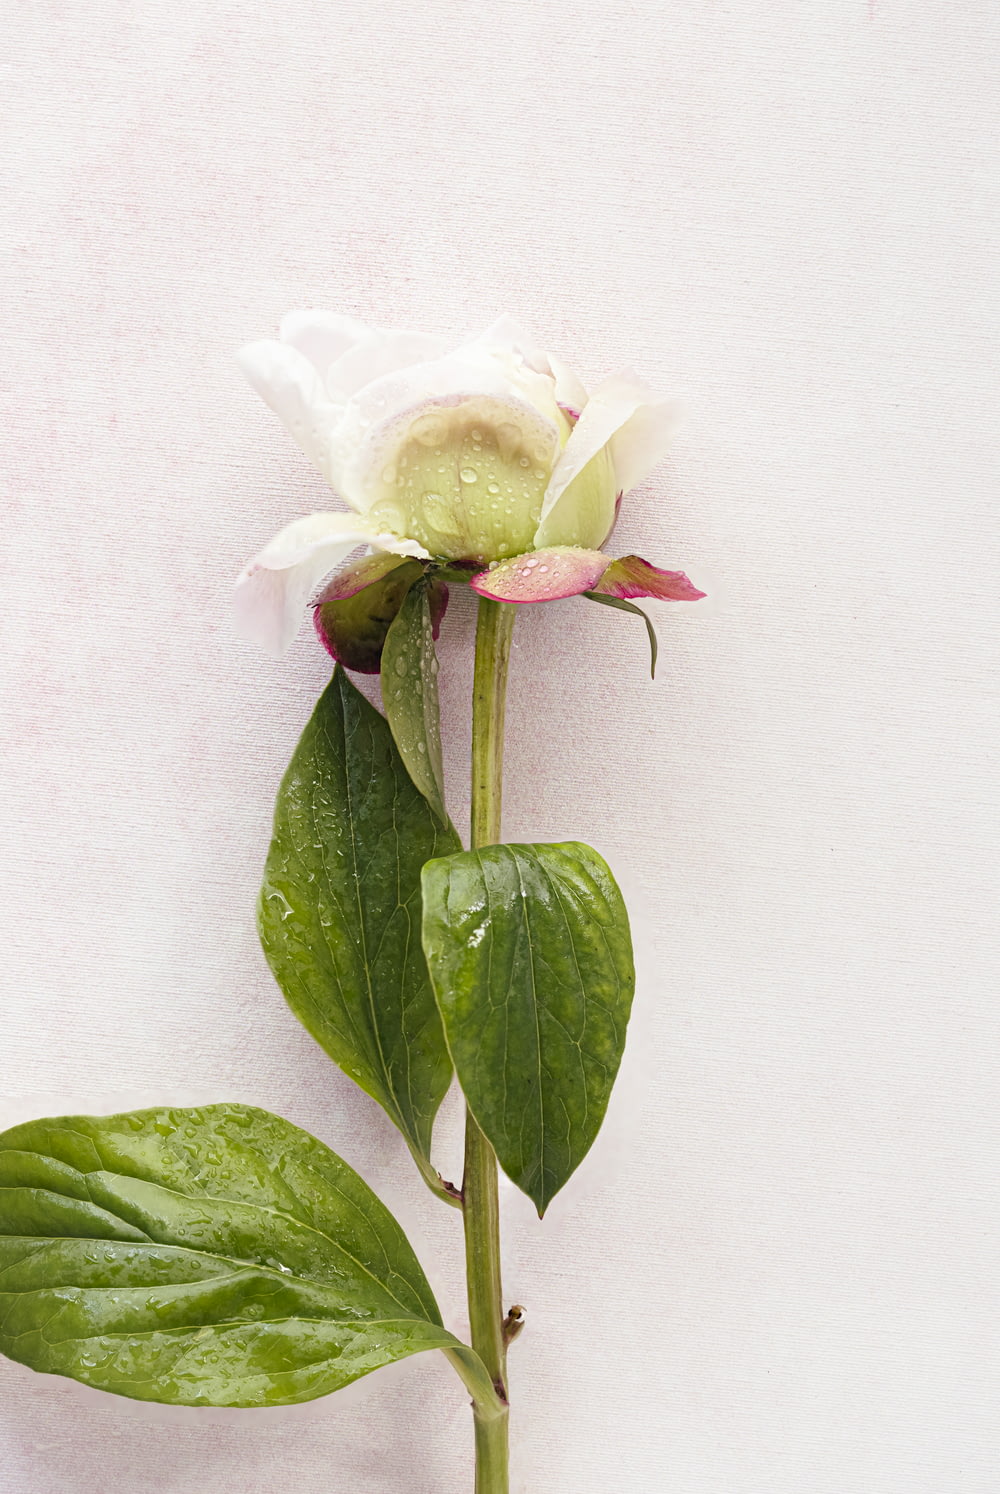 a single white rose with green leaves on a white background